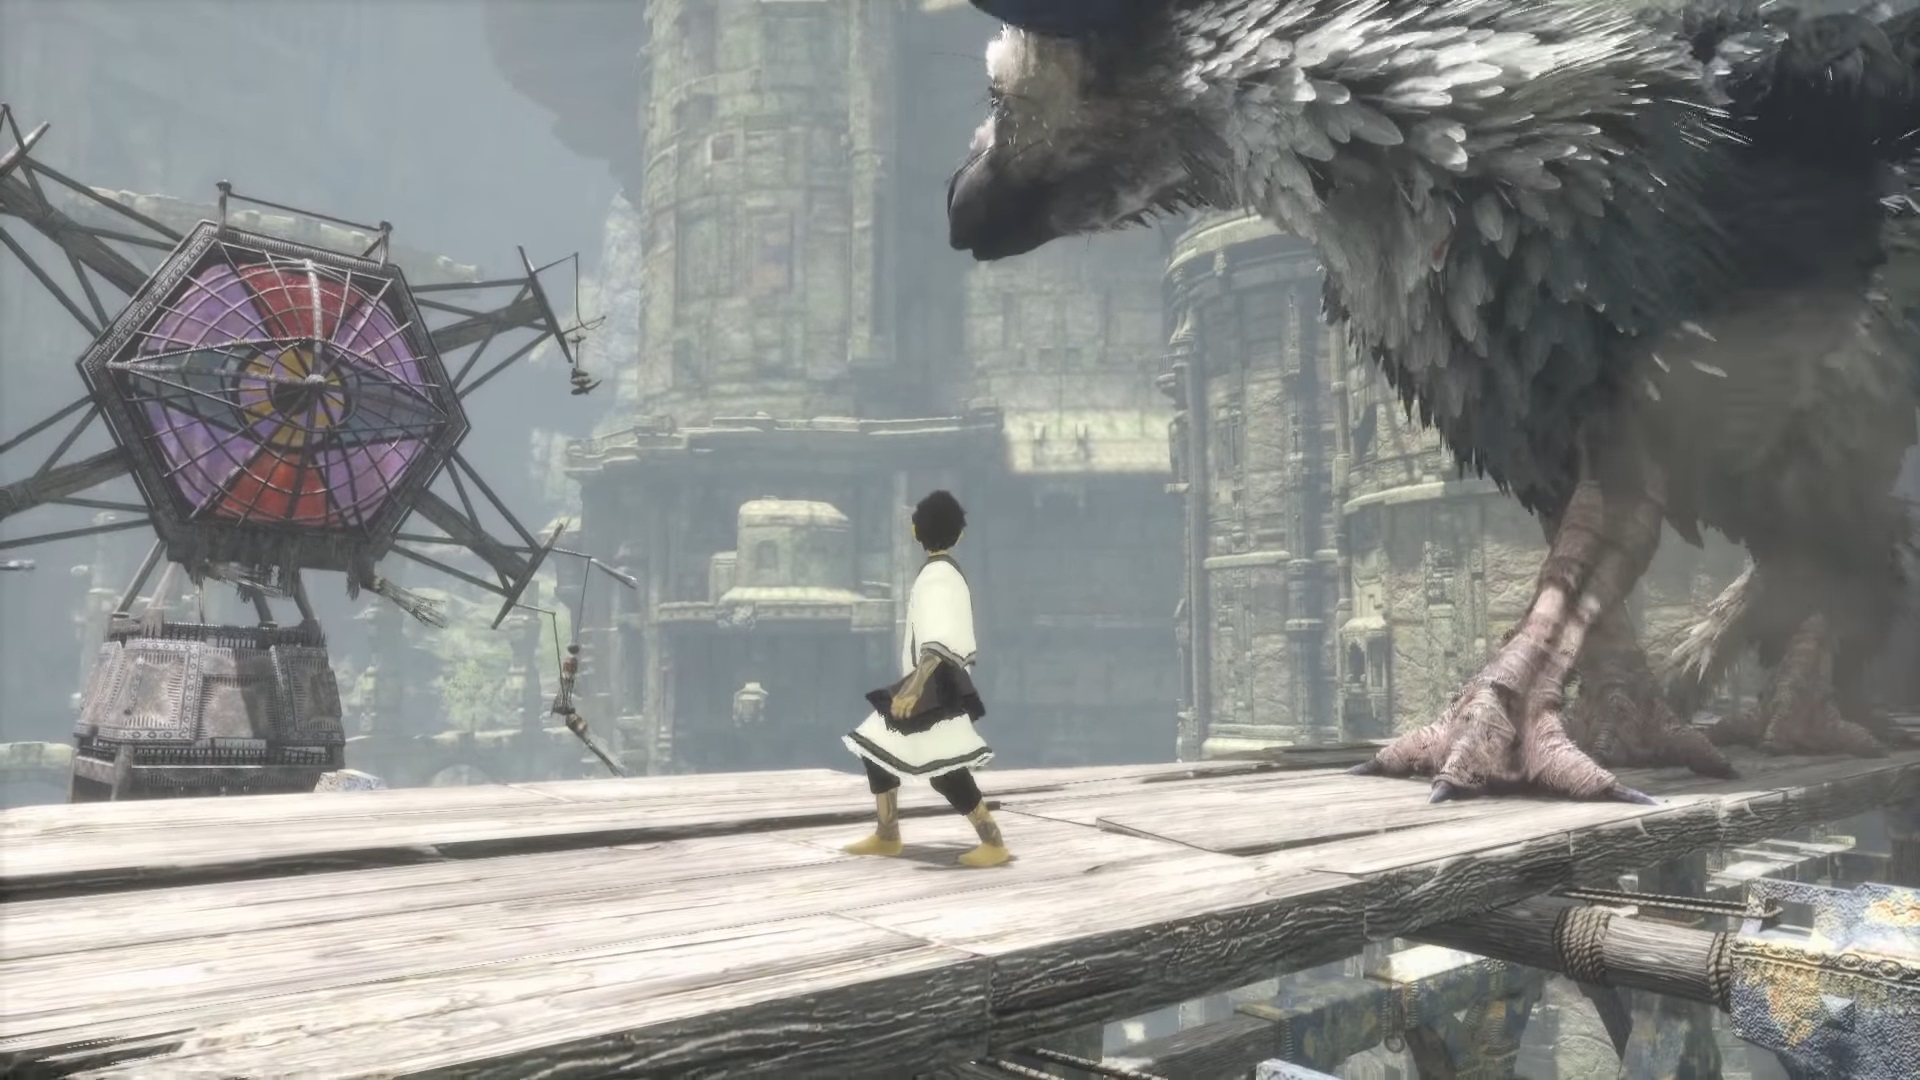 Guardian ps4. The last Guardian. Игра the last Guardian. The last Guardian ps4. Трико игра the last Guardian.